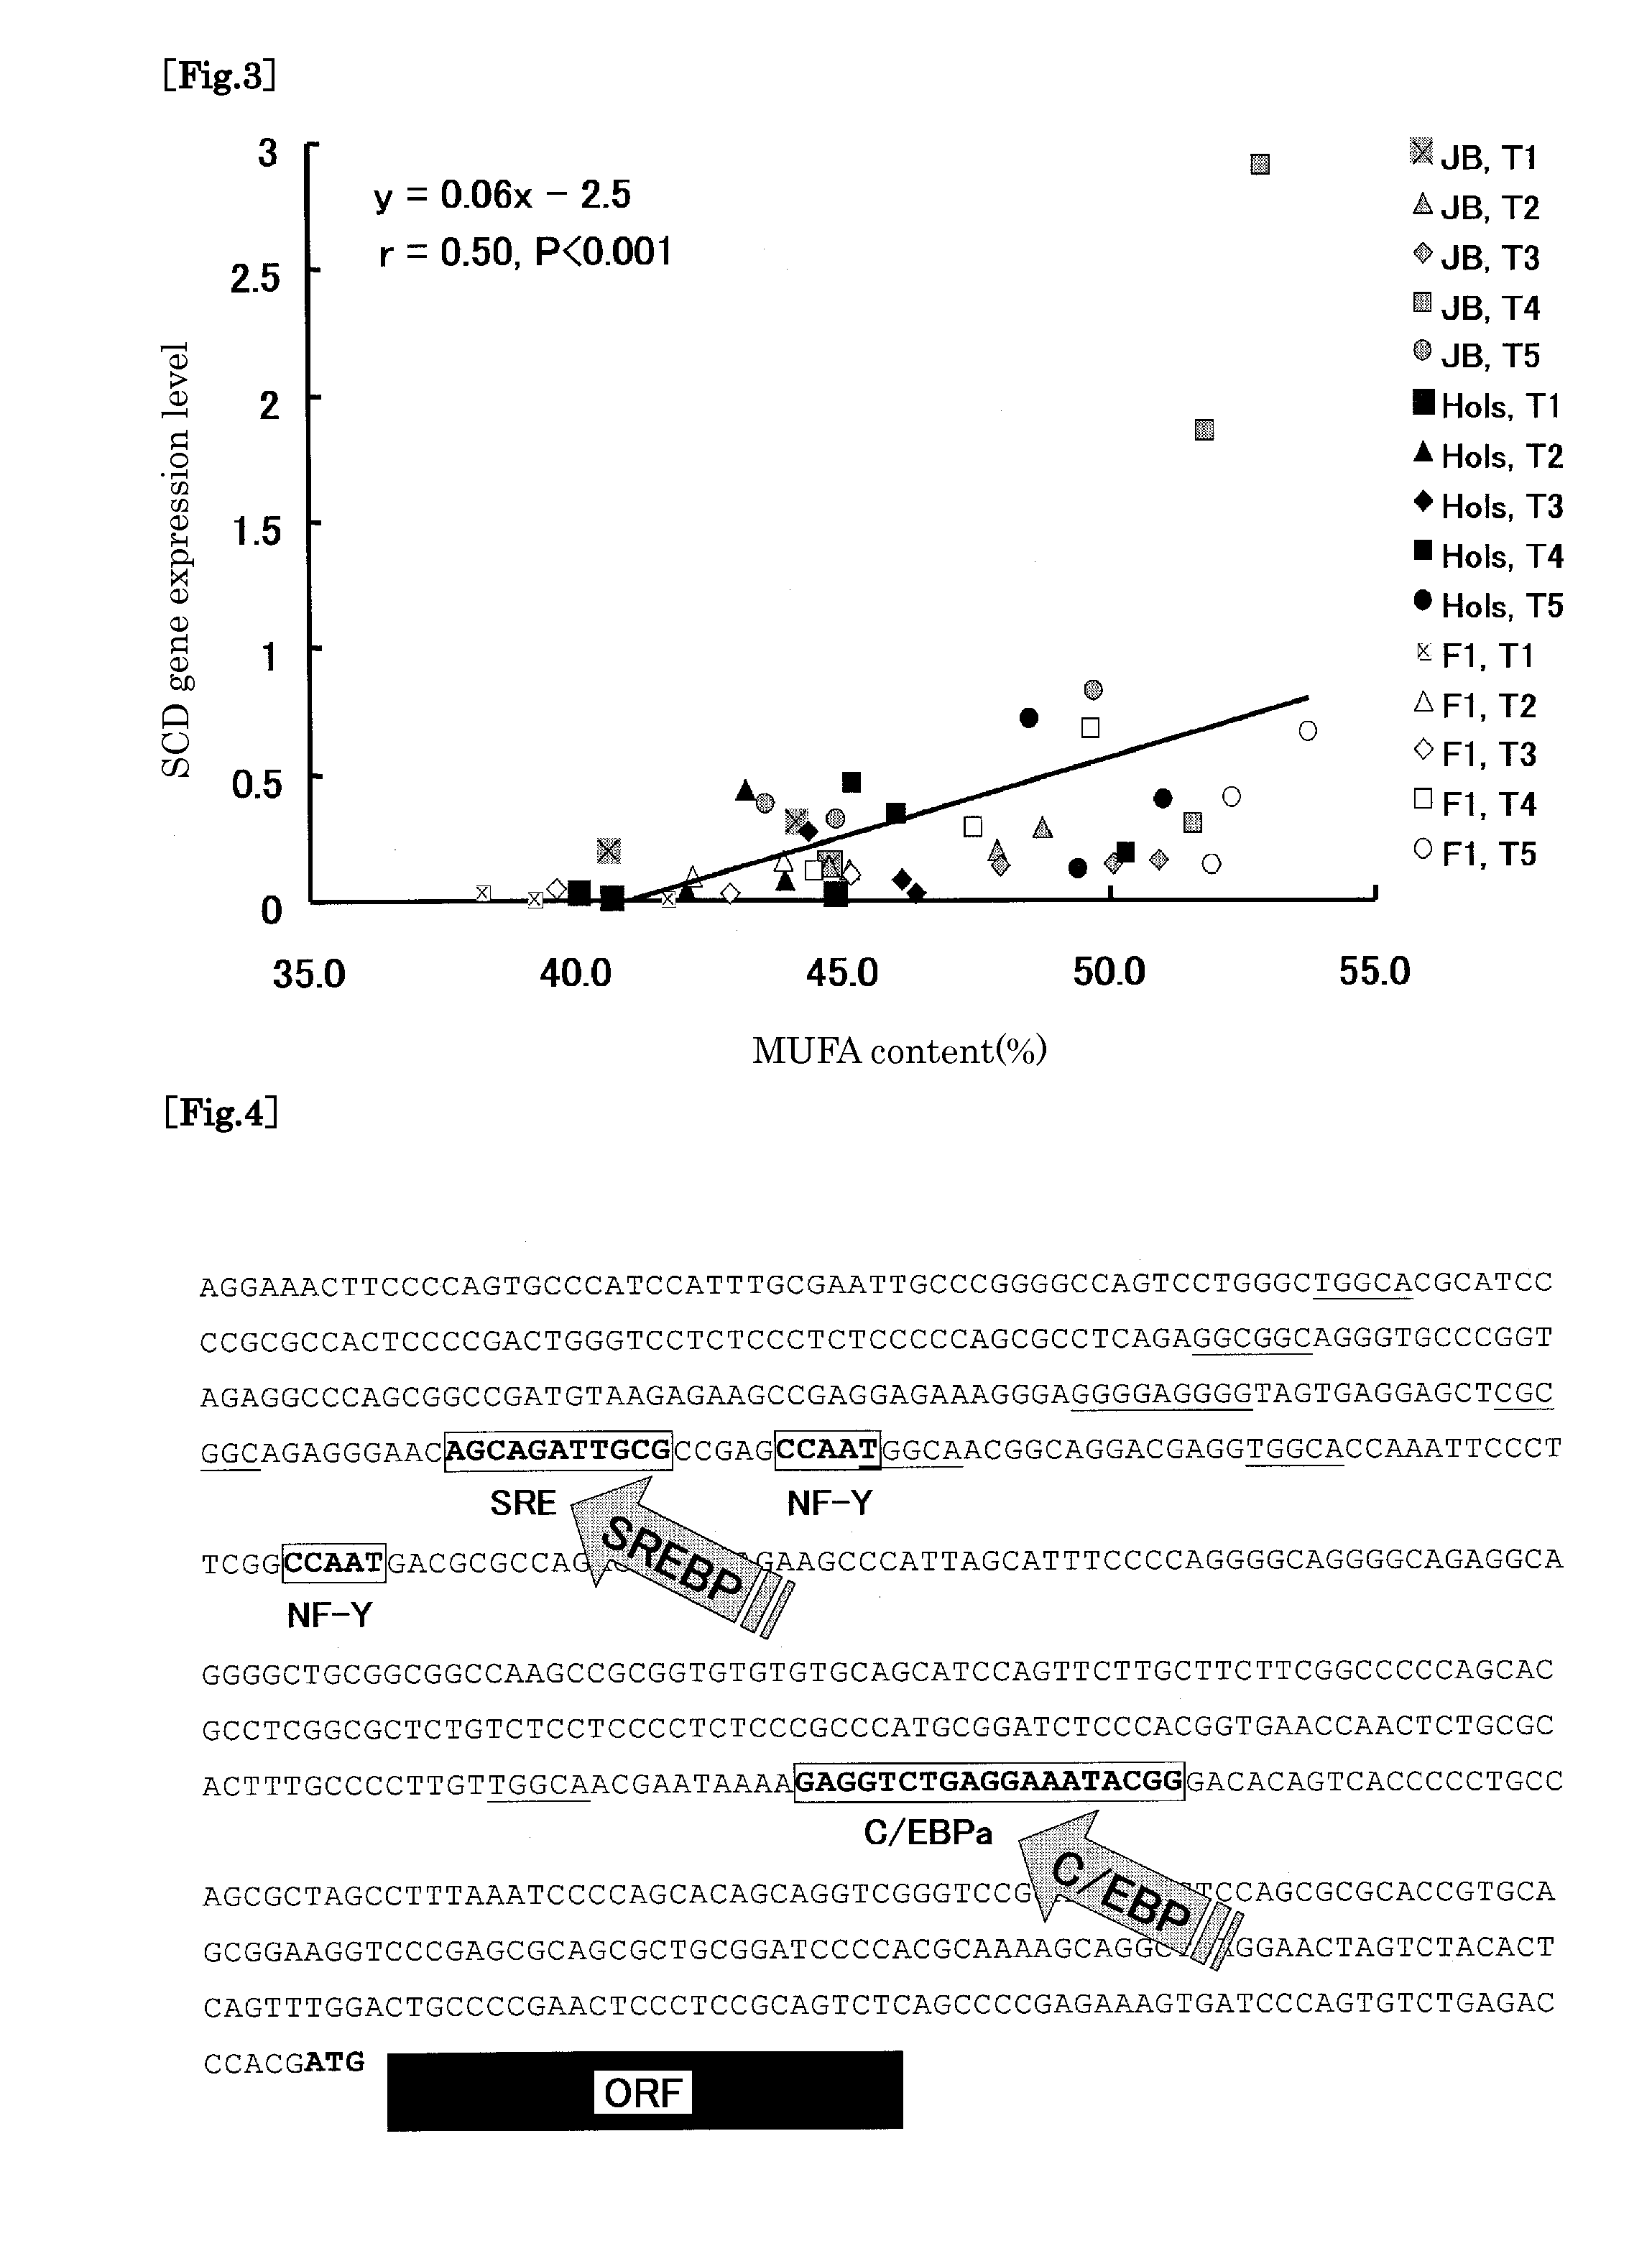 Method of Determining Gene Relating to Favorable Beef Taste and Texture